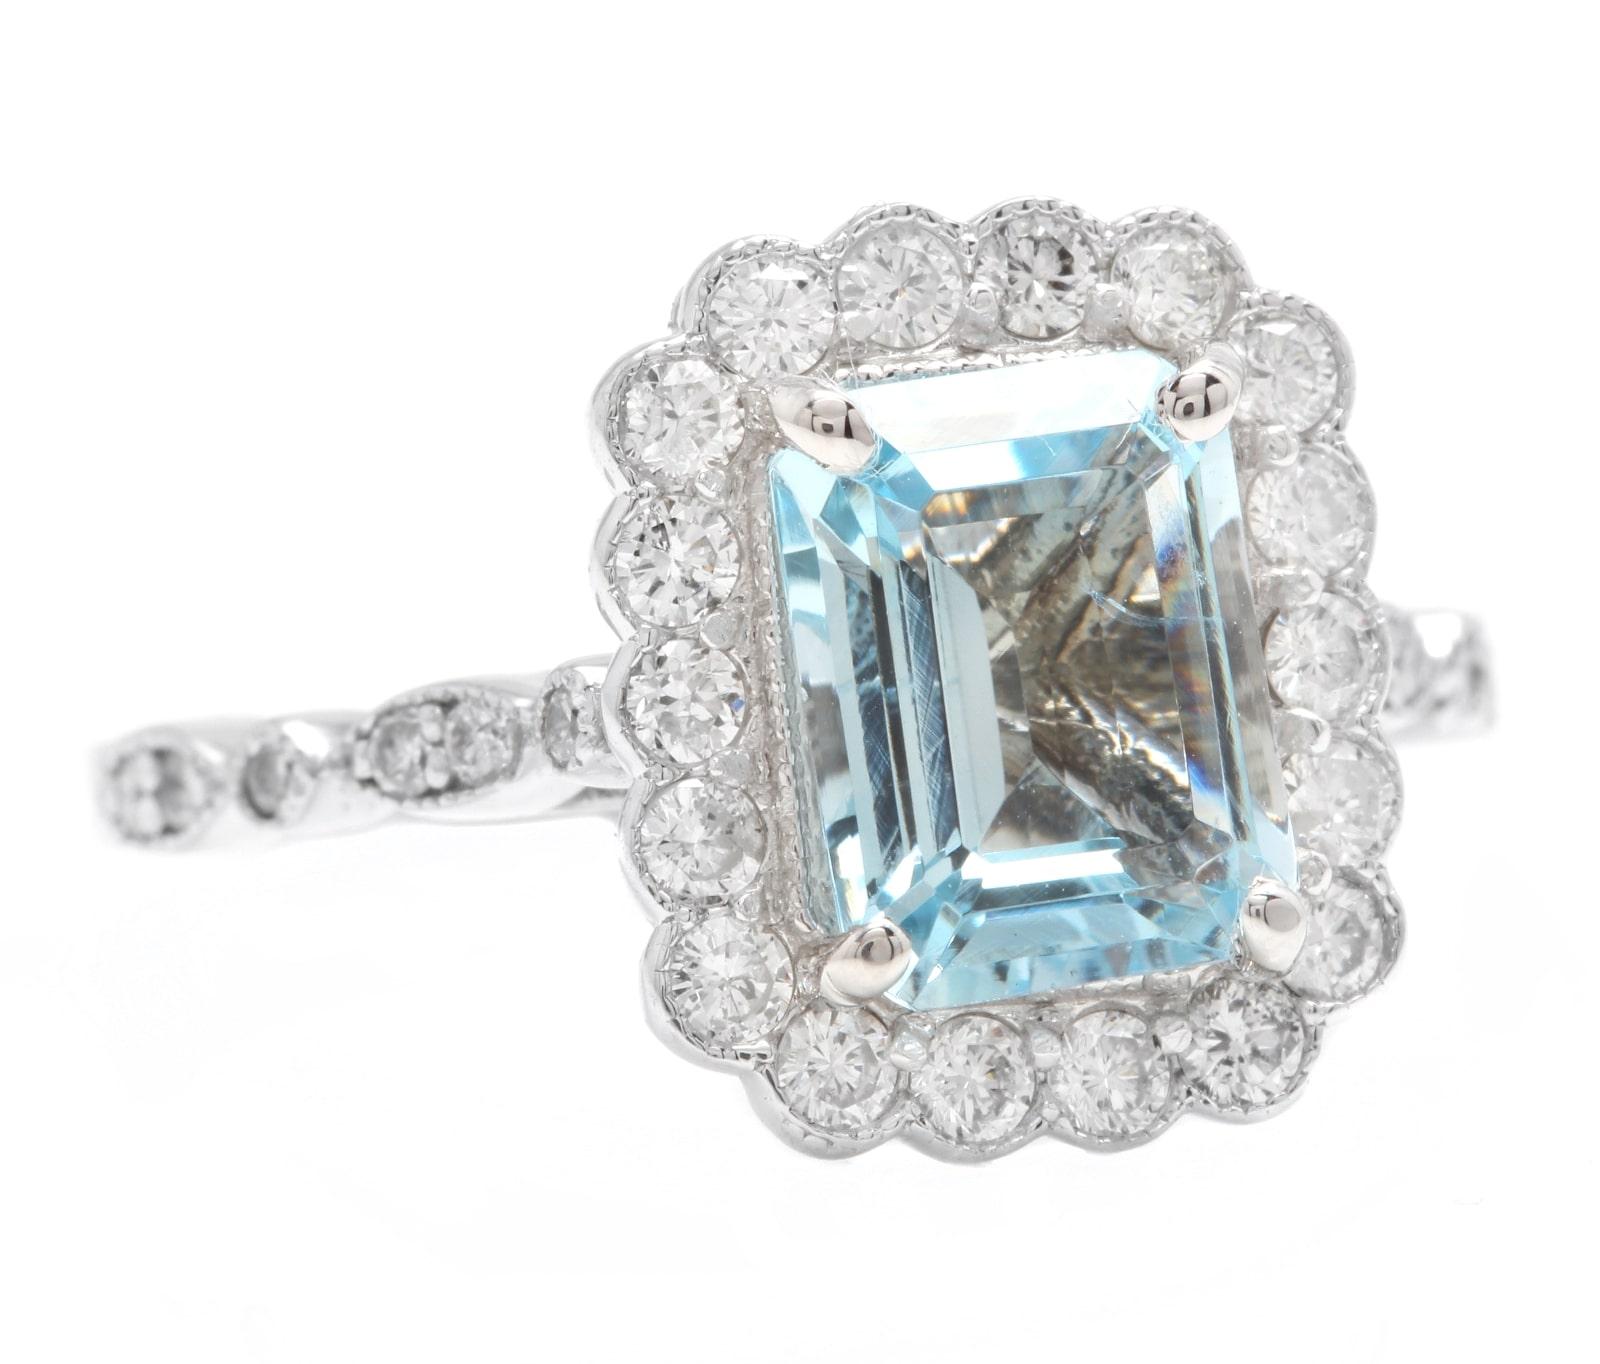 2.60 Carats Natural Aquamarine and Diamond 14K Solid White Gold Ring

Suggested Replacement Value: Approx. $5,000.00

Total Natural Emerald Cut Aquamarine Weights: Approx. 2.00 Carats 

Aquamarine Measures: Approx. 9.00 x 7.00mm

Aquamarine